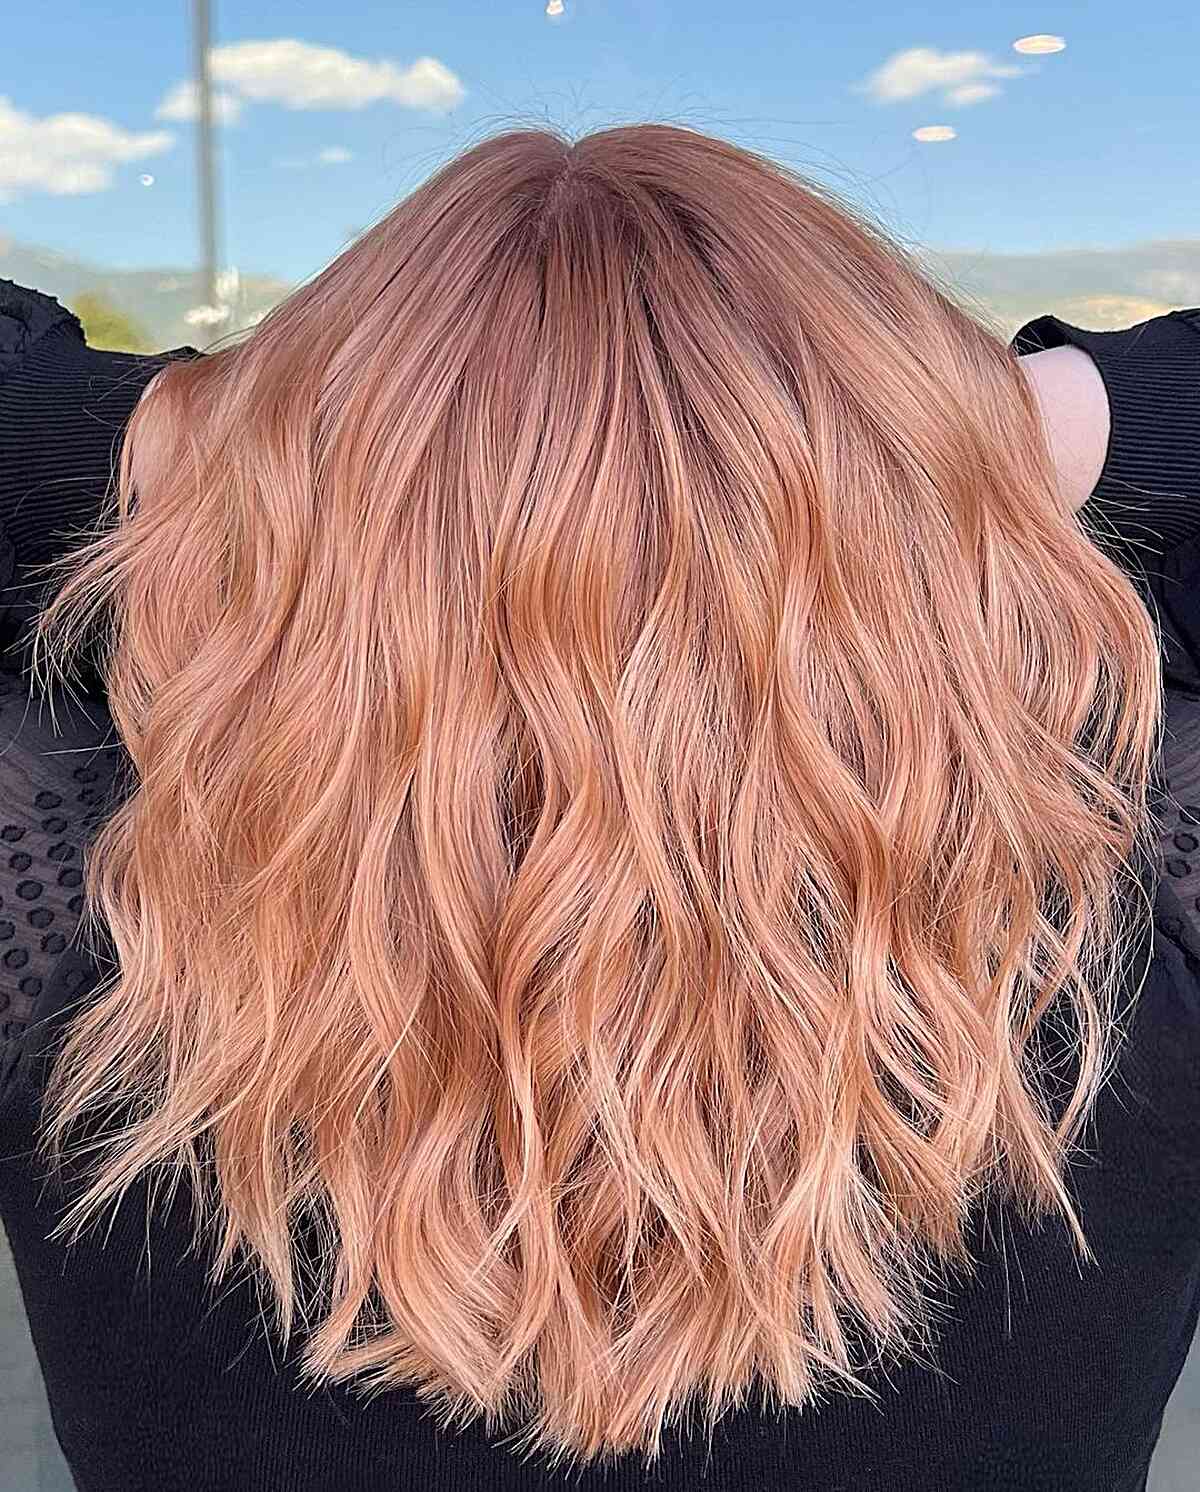 Creamy Light Strawberry Blonde Copper with Medium-Length Textured Waves